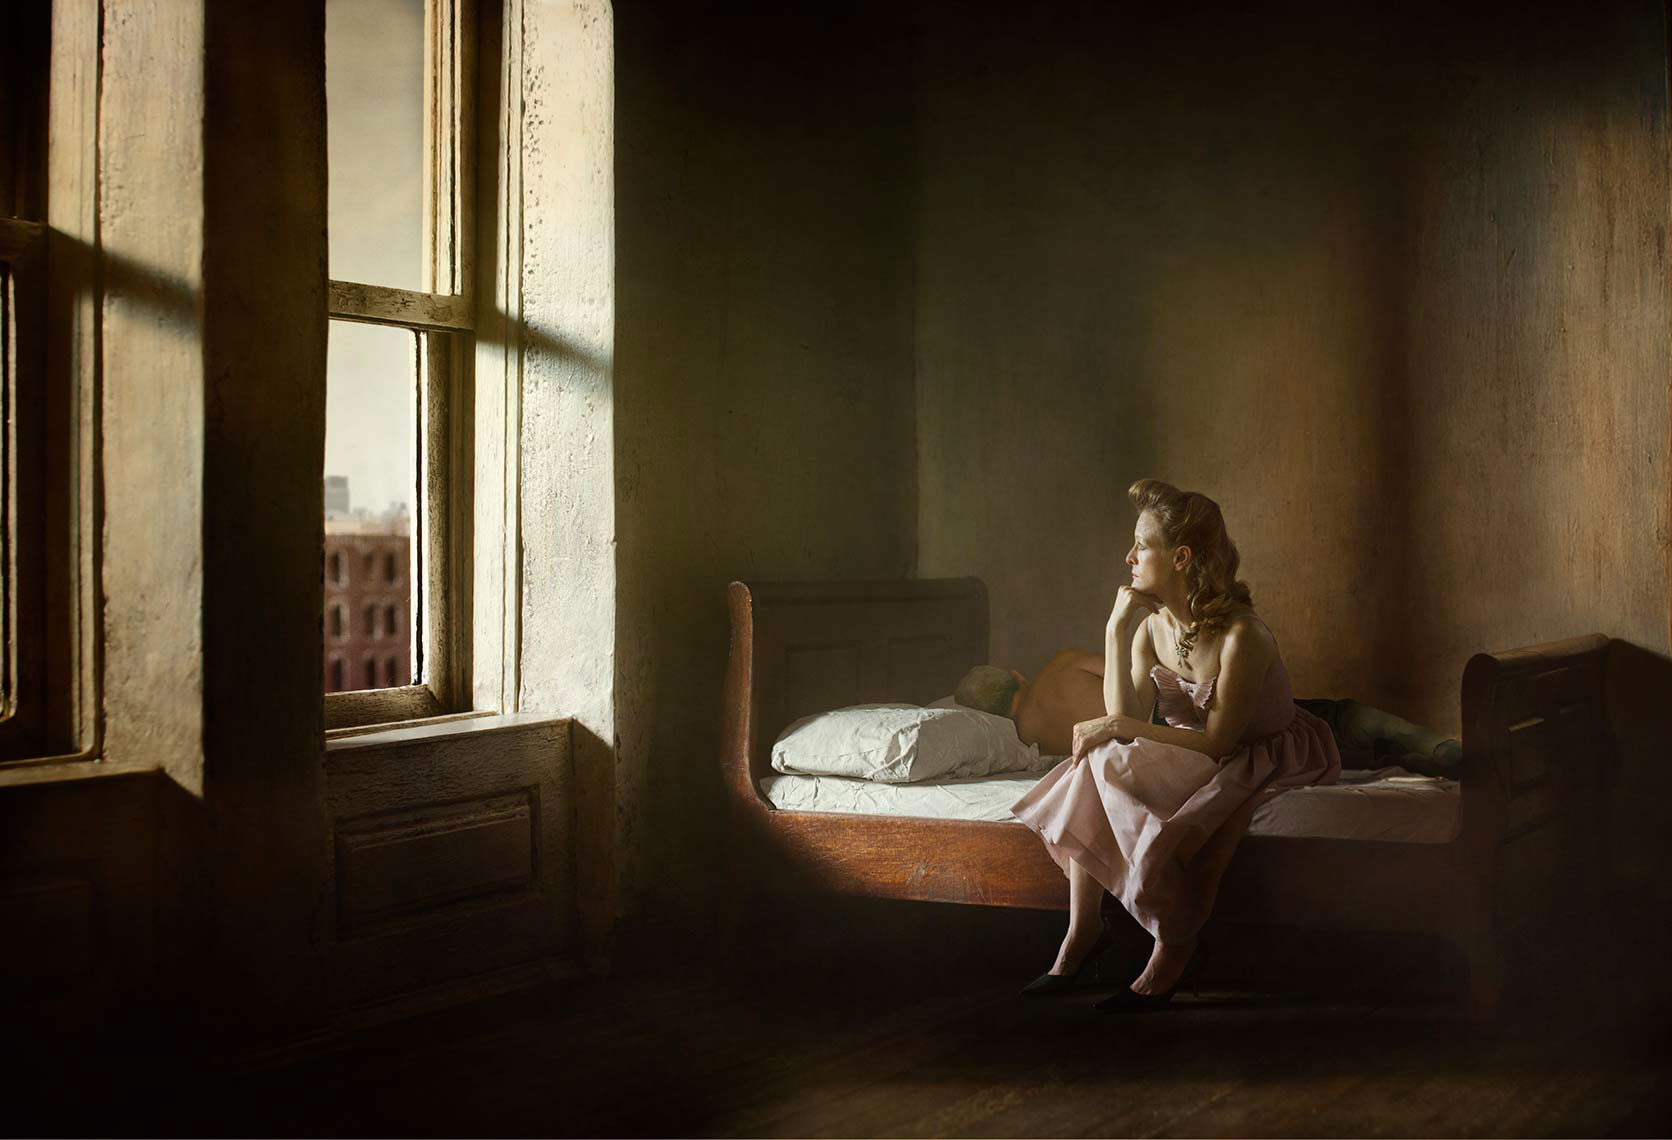 A photomontage homage to Edward Hopper’s painting, “Summer in the City”, set in a 1940s’ New York apartment bedroom, a melancholic blonde woman wearing a pale pink sleeveless dress sits on the rumpled sheets of an unmade bed, gazing in contemplation out the window onto the urban landscape, her male companion asleep in the shadows next to her.